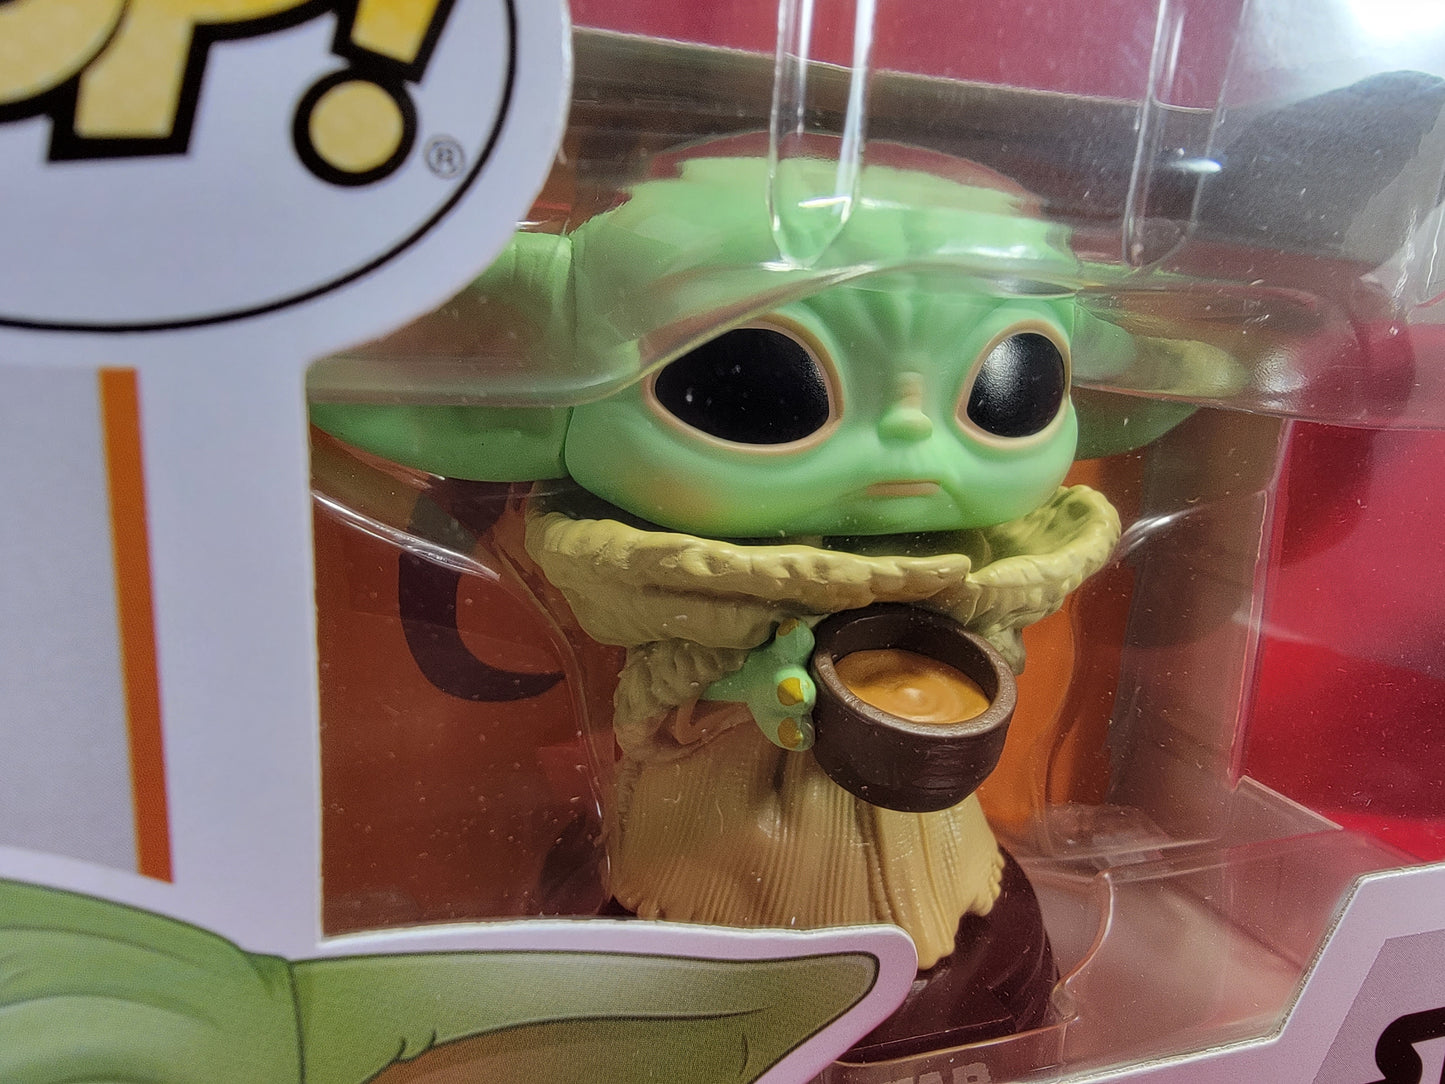 The child with cup funko # 378 (nib)